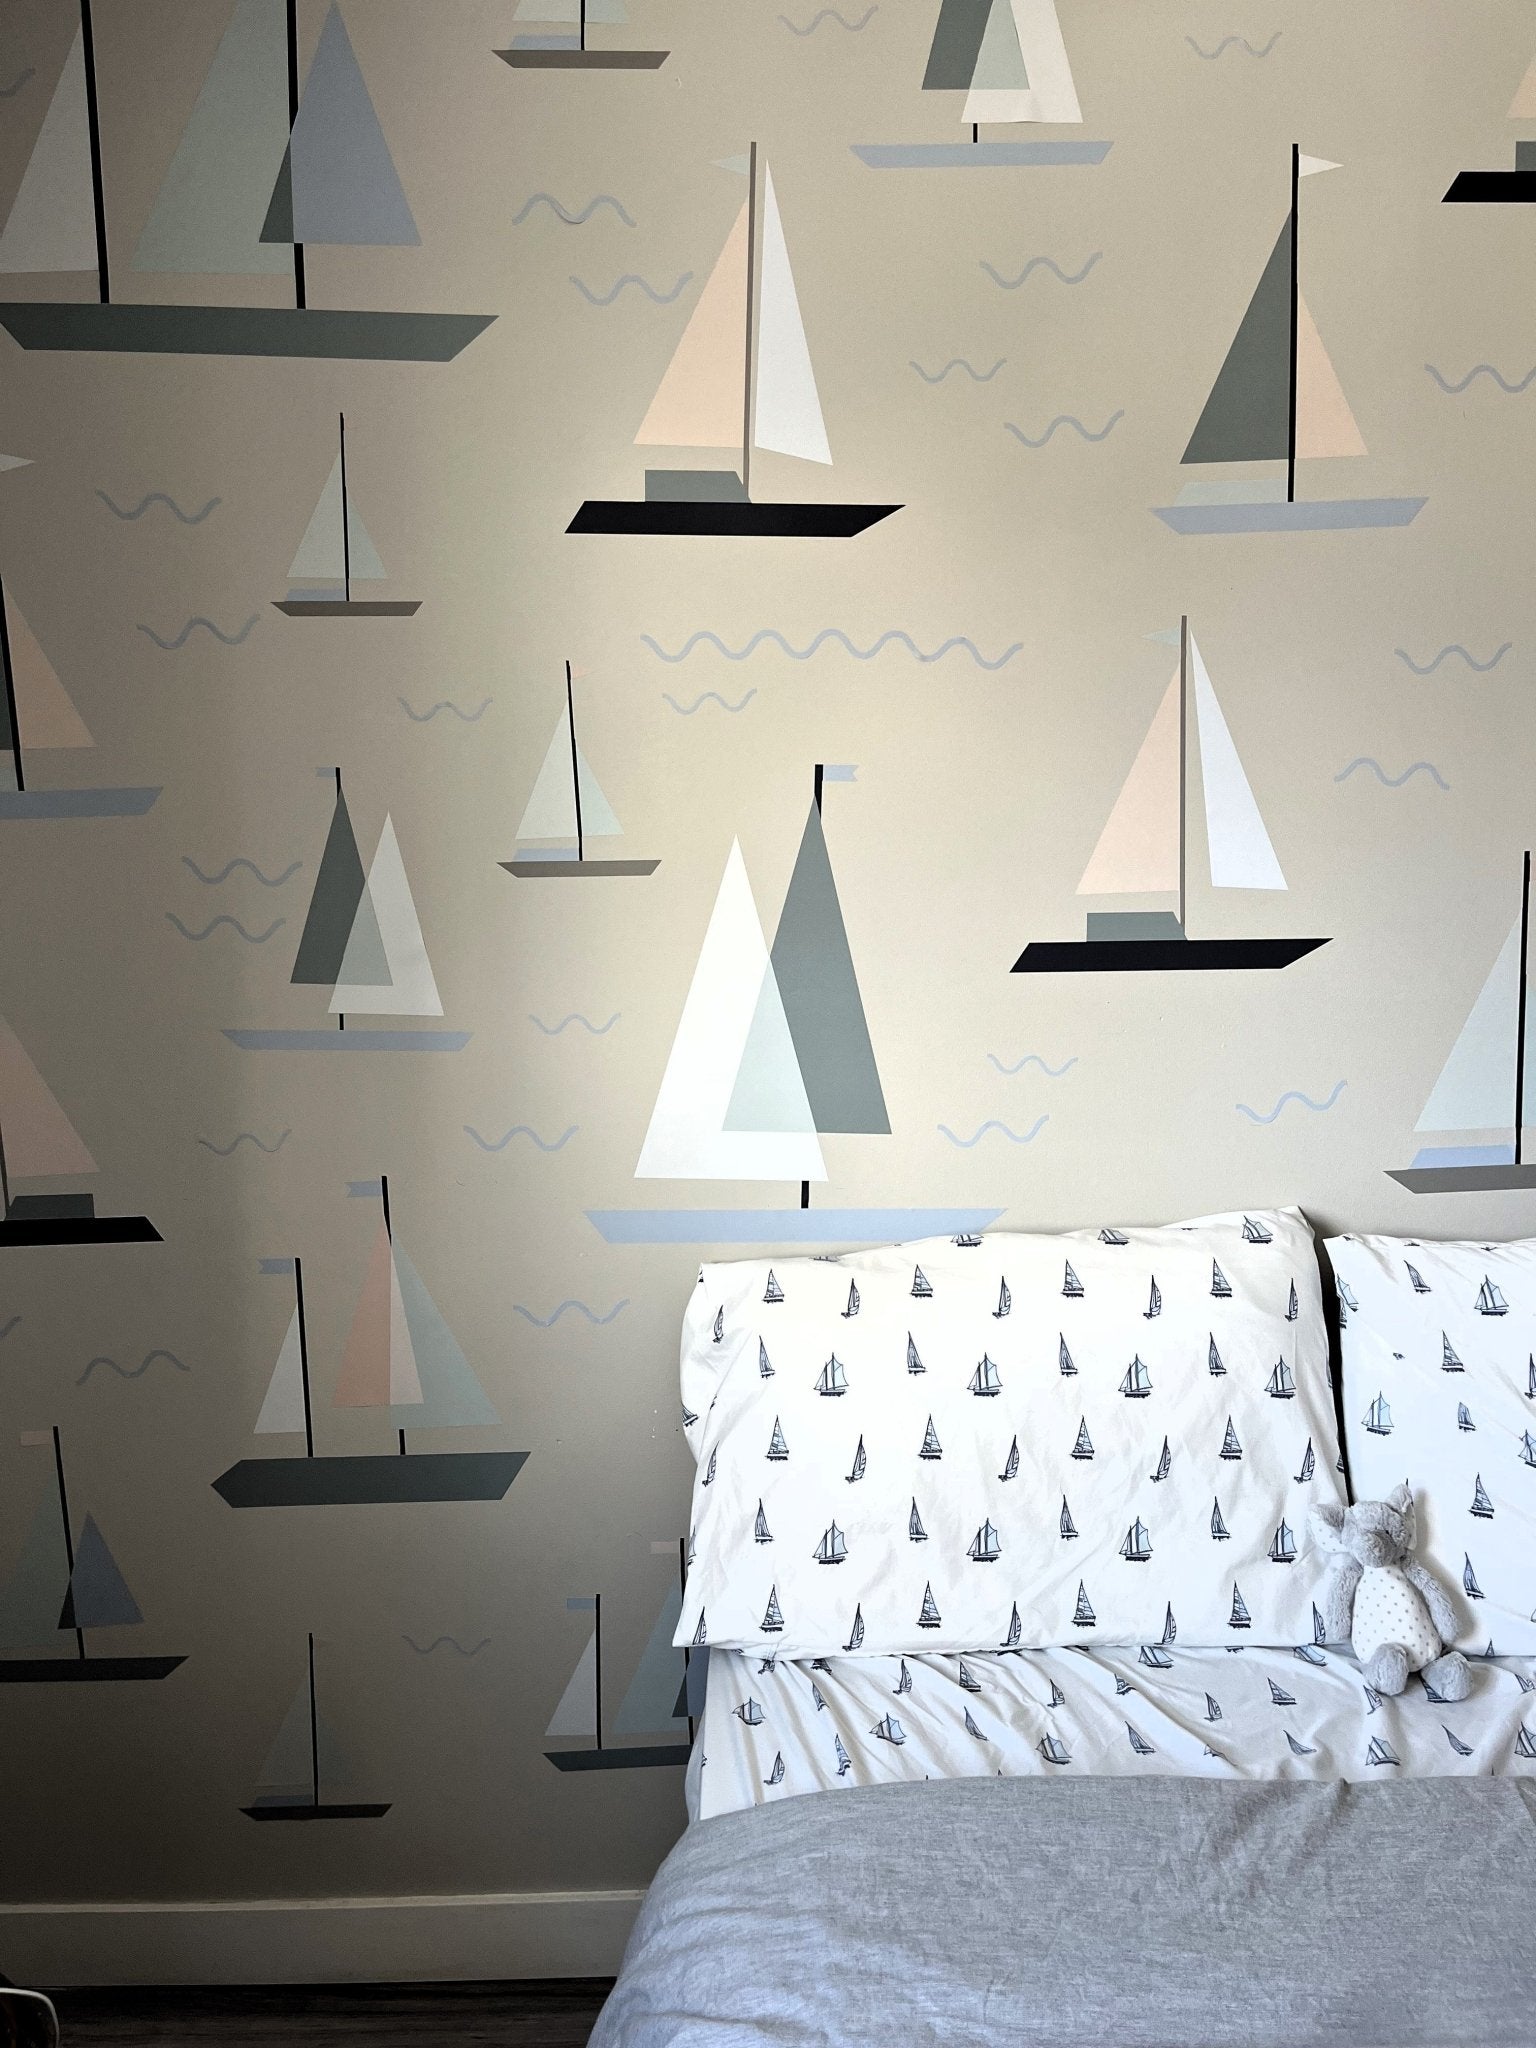 A bedroom with a wall covered in sailboat decals, complementing bedding with a similar pattern, and a plush toy on the bed, creating a serene nautical theme.